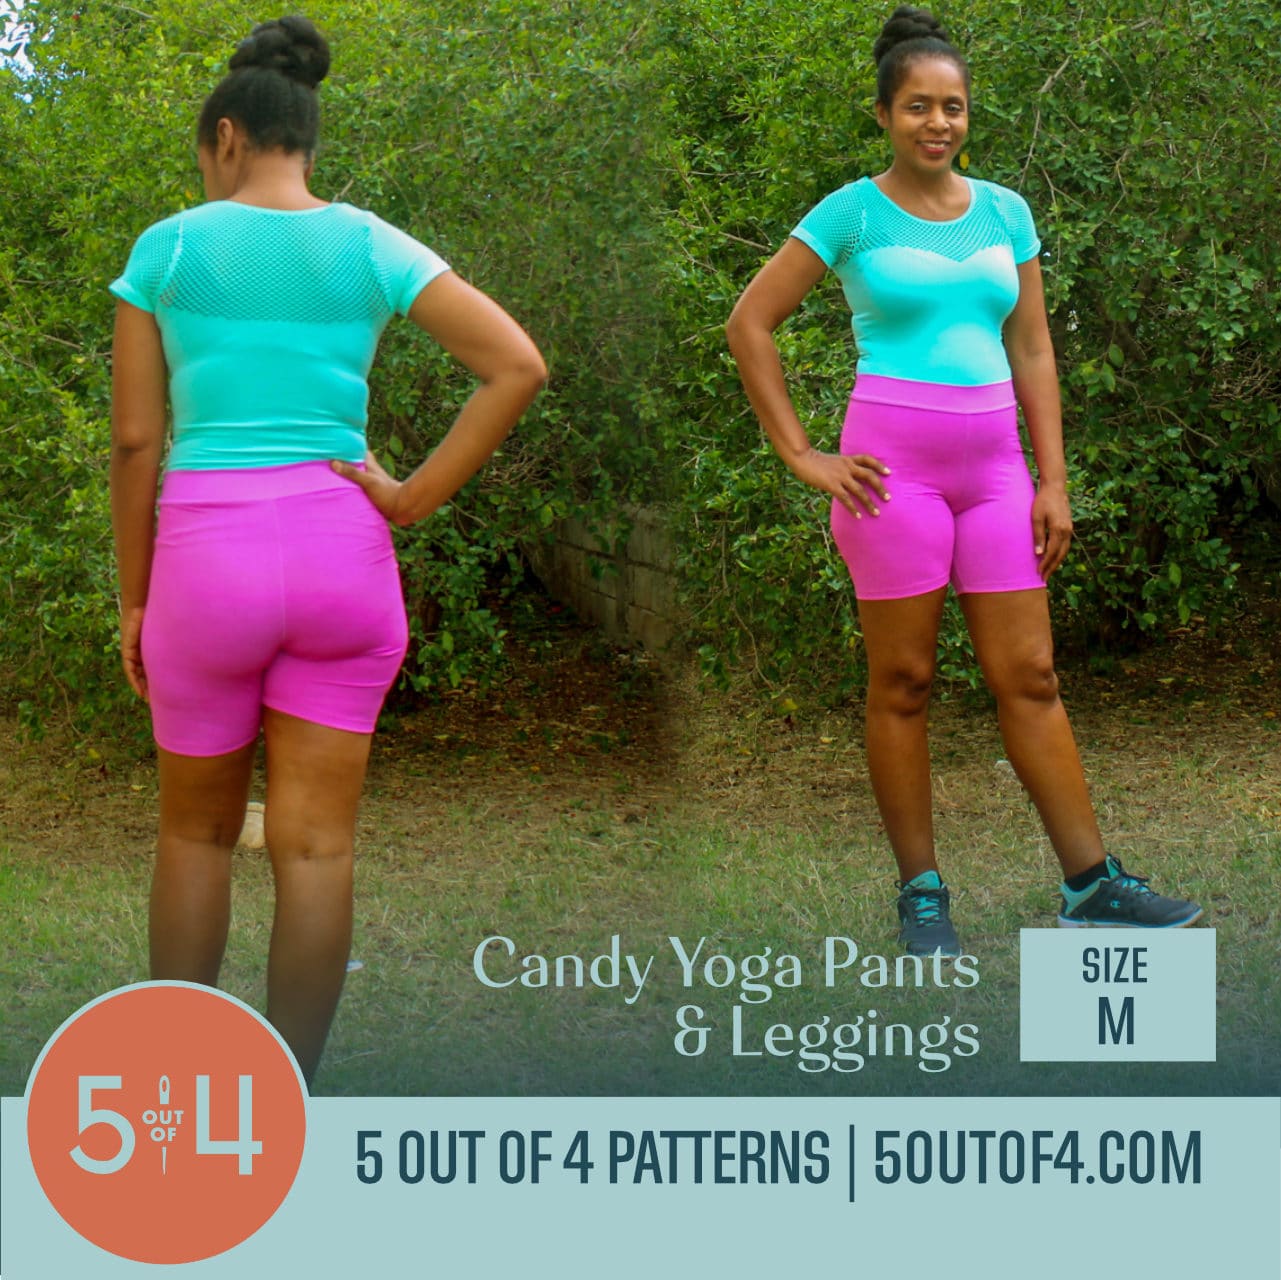 https://5outof4.com/wp-content/uploads/2020/02/Candy-Yoga-Pants-and-Leggings-size-M.jpg